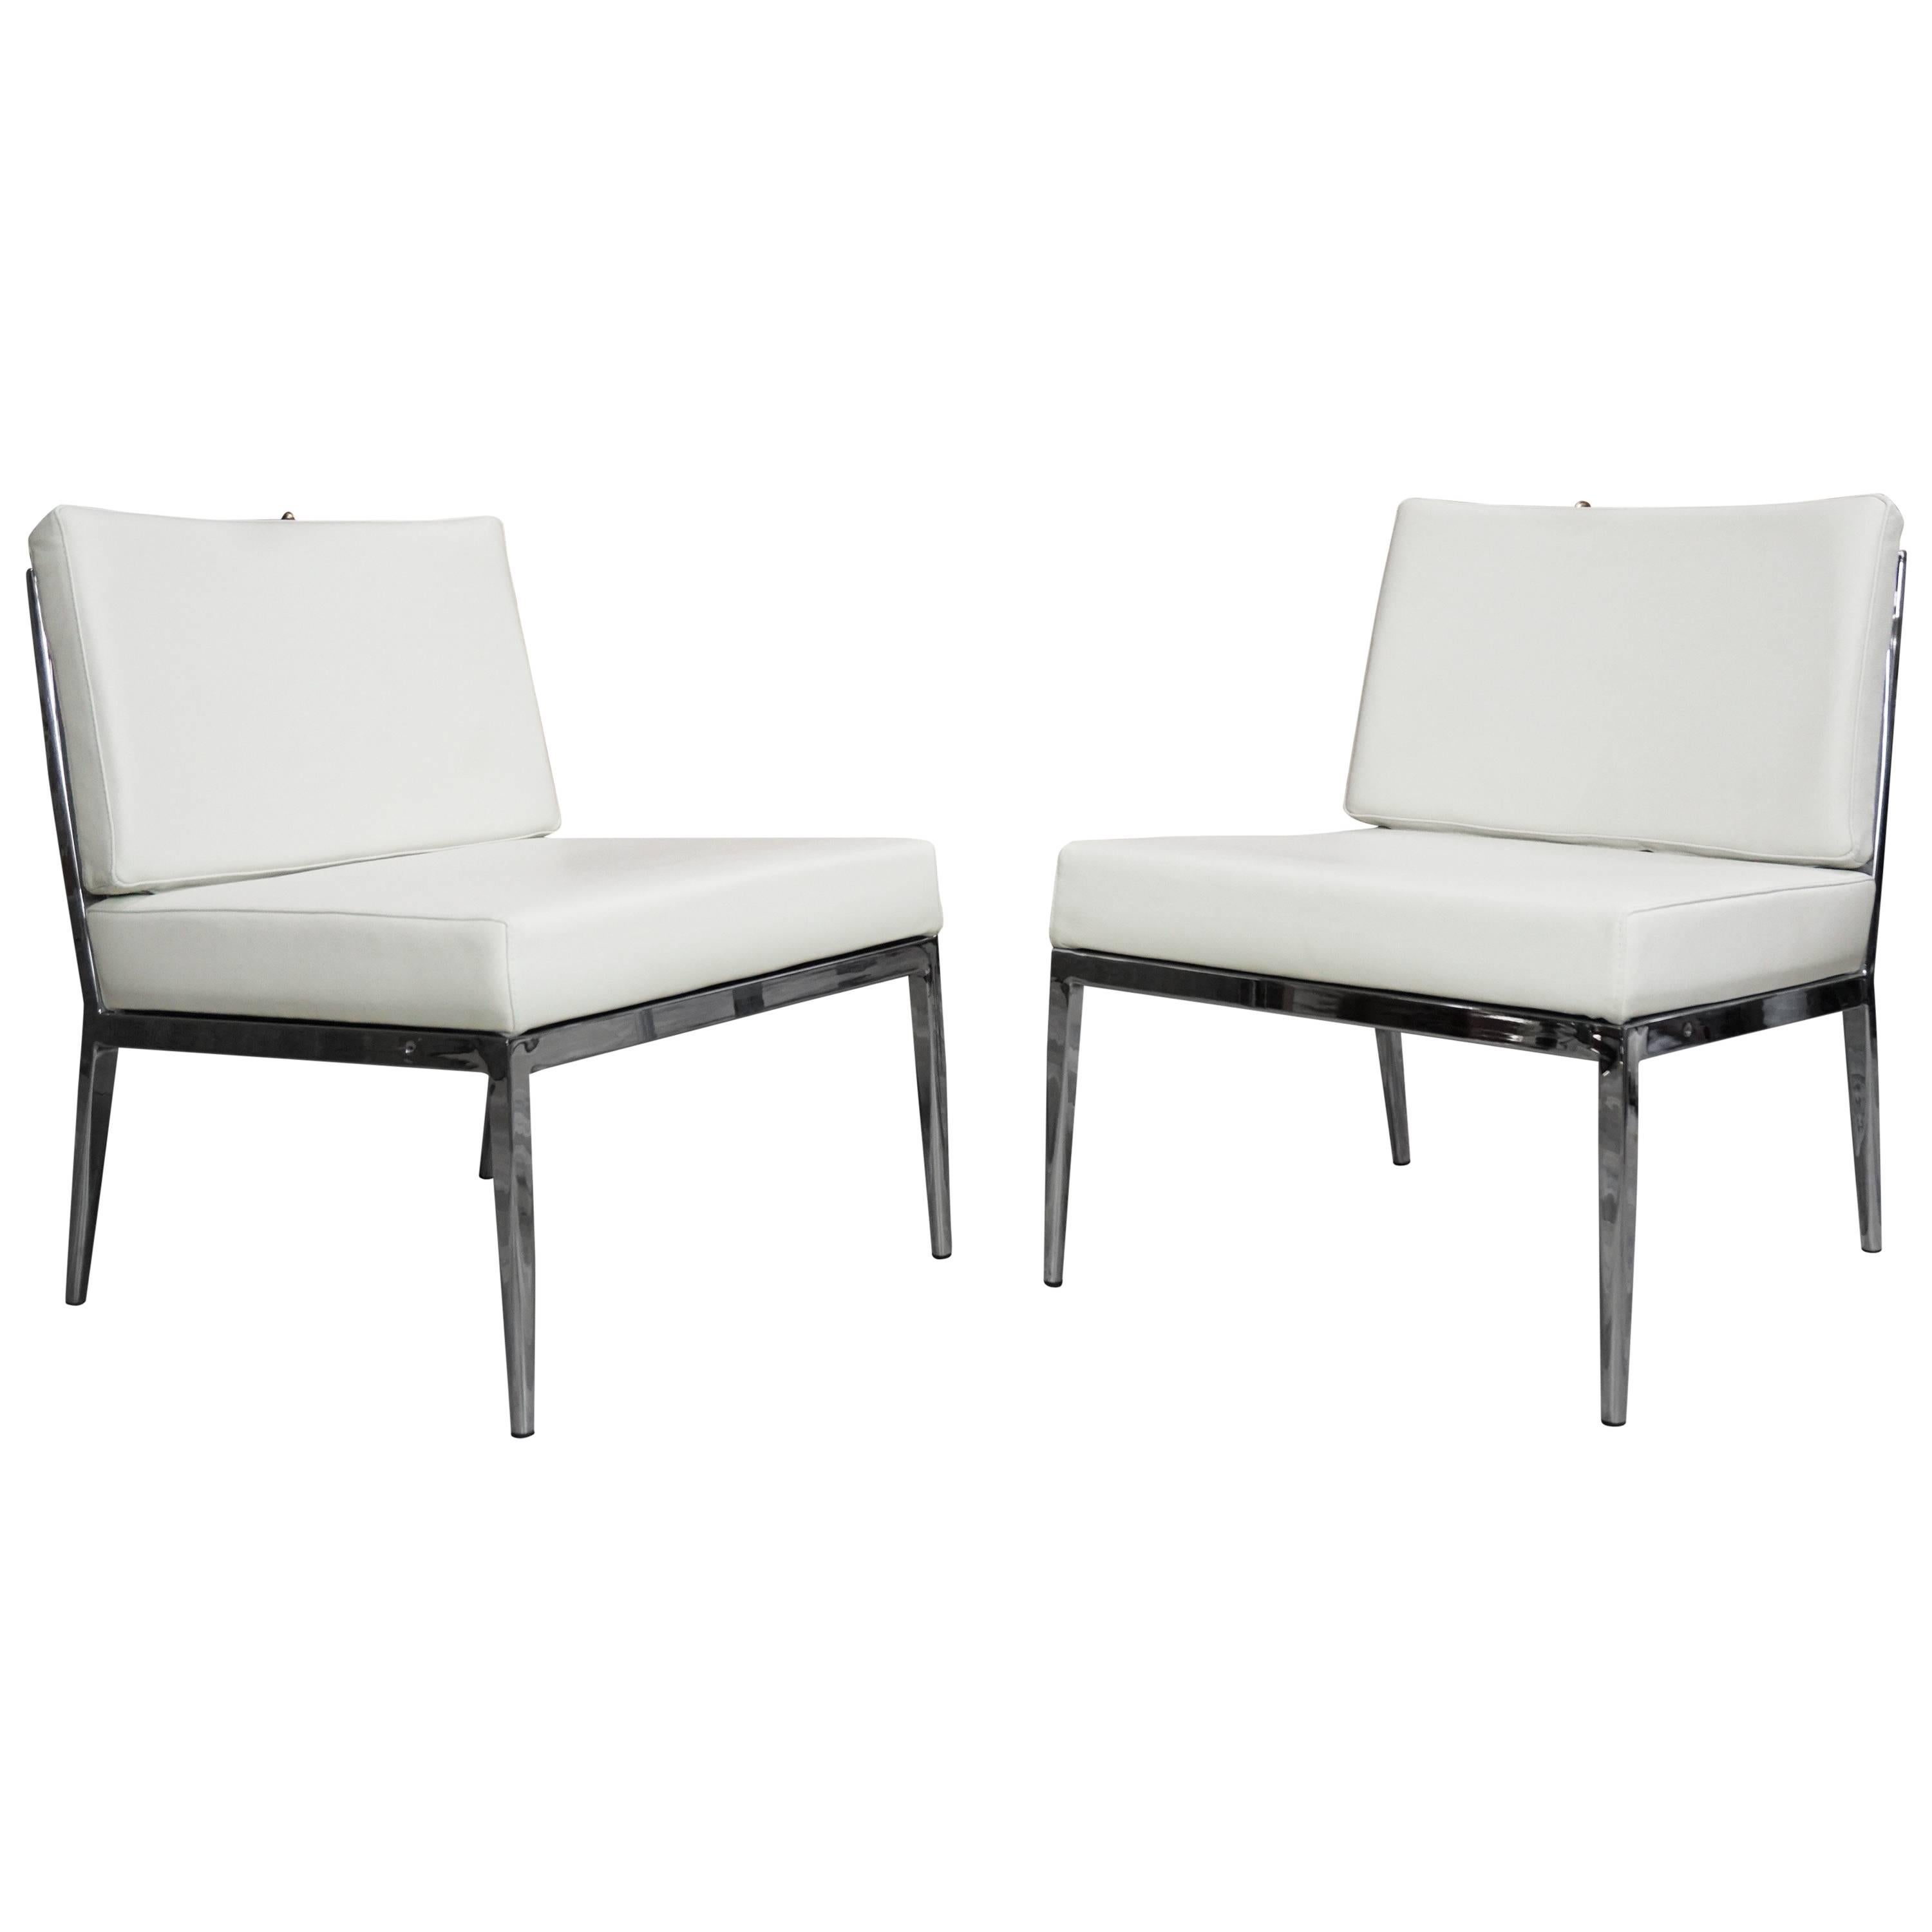 Italian design white leather and chrome metal lounger chairs trendy and class, chromed structure, removable cushions cover in beige leather. Comfortable, lounge seat with a height of 41 cm.